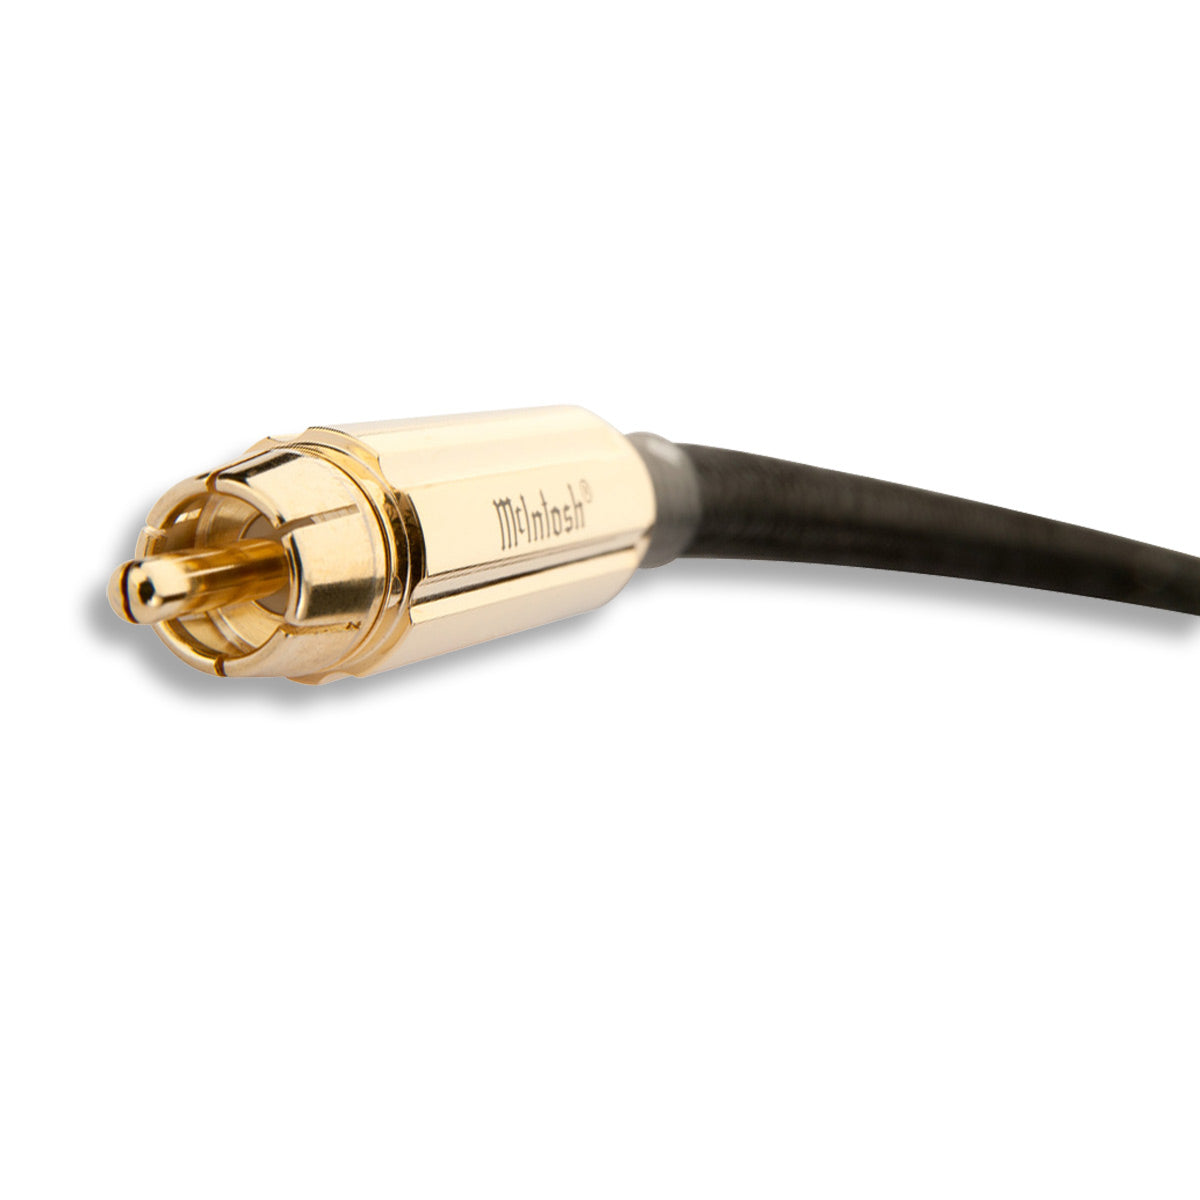 McIntosh Coaxial Digital Audio Cable - 3.28 ft. (1m)